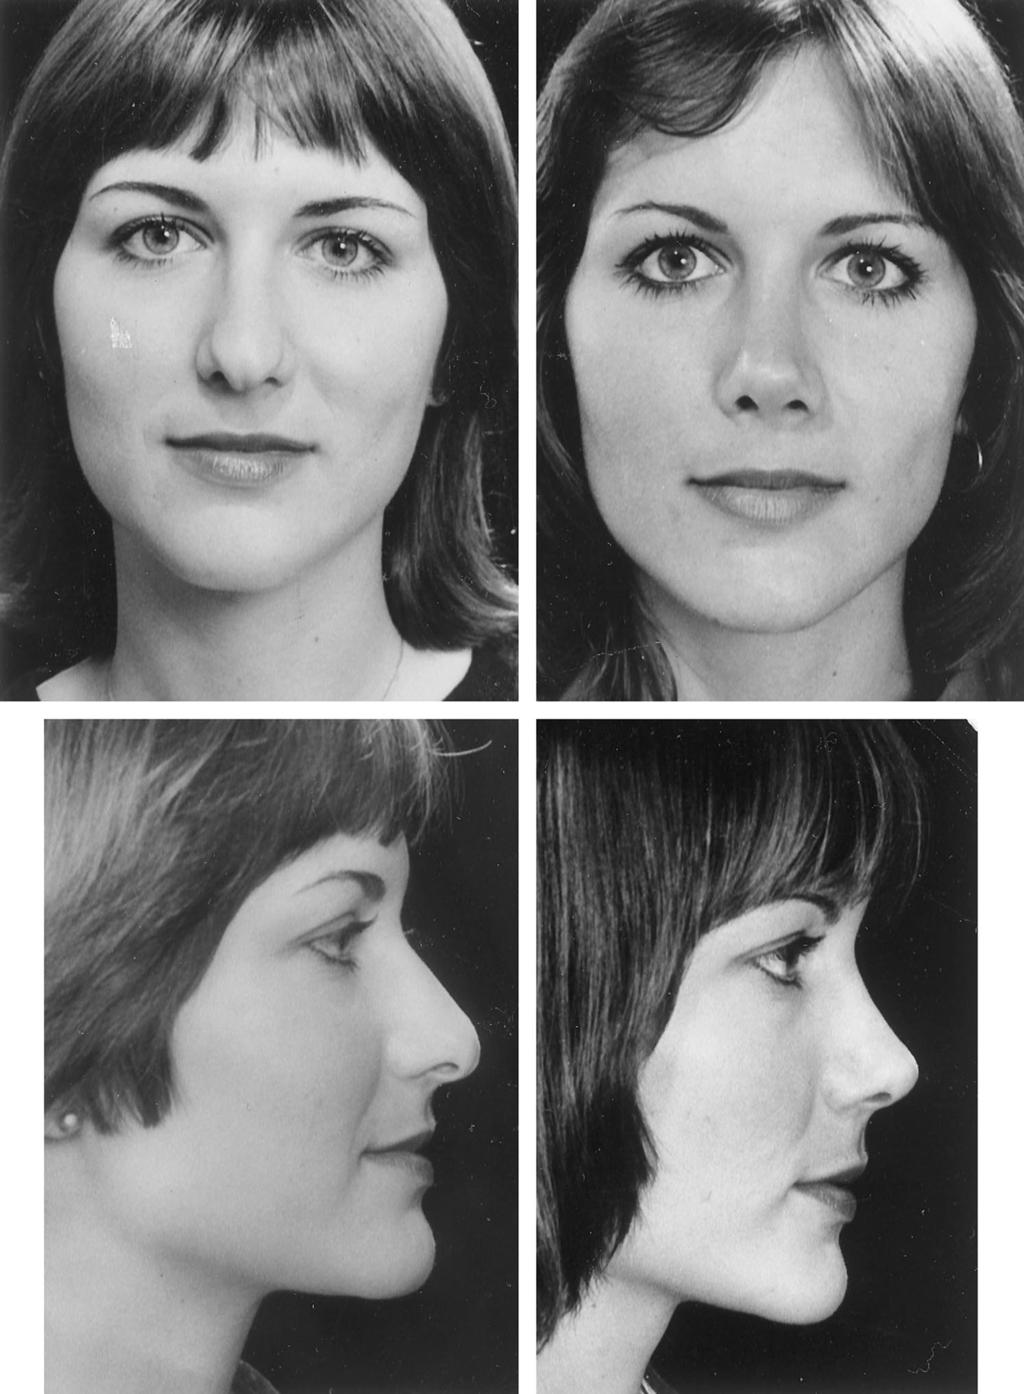 Vol. 105, No. 5 / RHINOPLASTY: PERSONAL EVOLUTION AND MILESTONES 1841 FIG. 23. Patient shown 14 months after surgery with good support to the alar rims and improved tip projection.